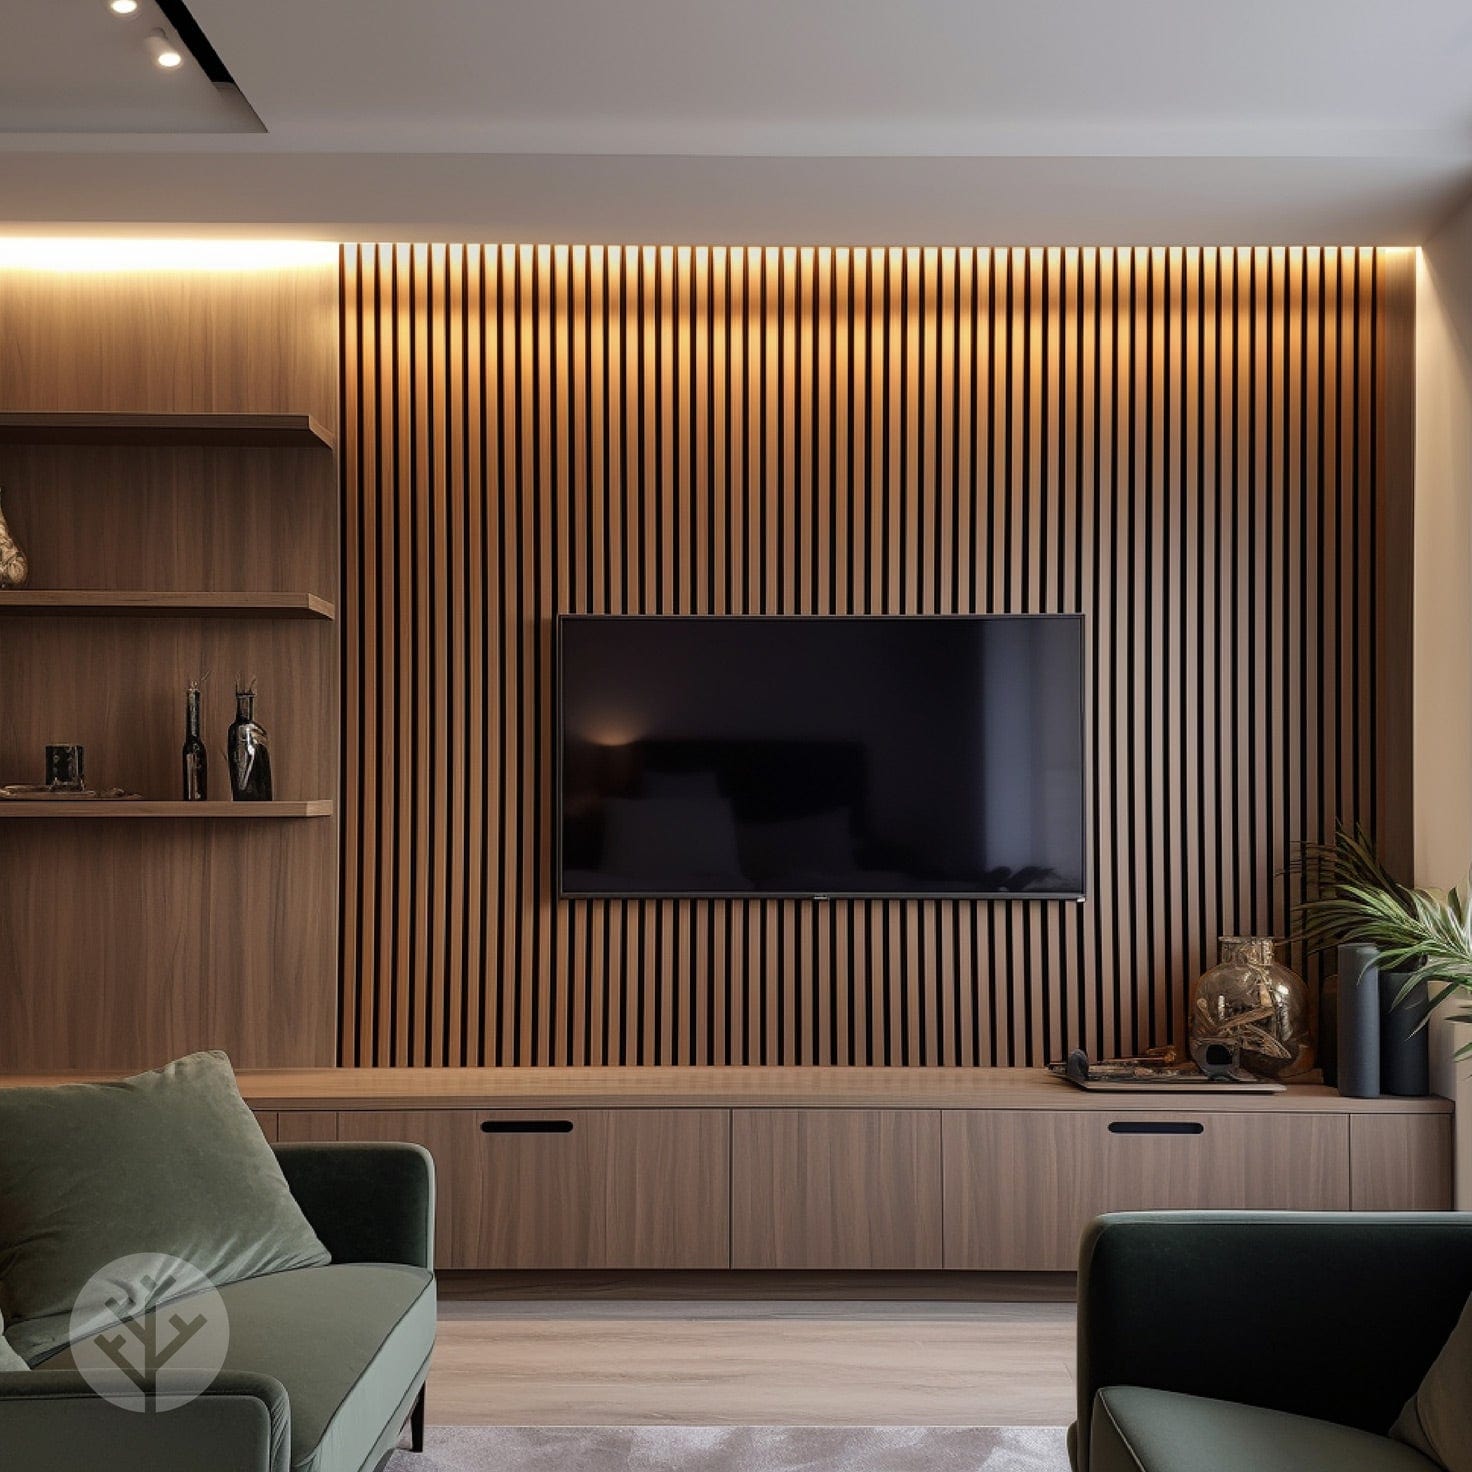 The essential guide to installing wooden wall paneling